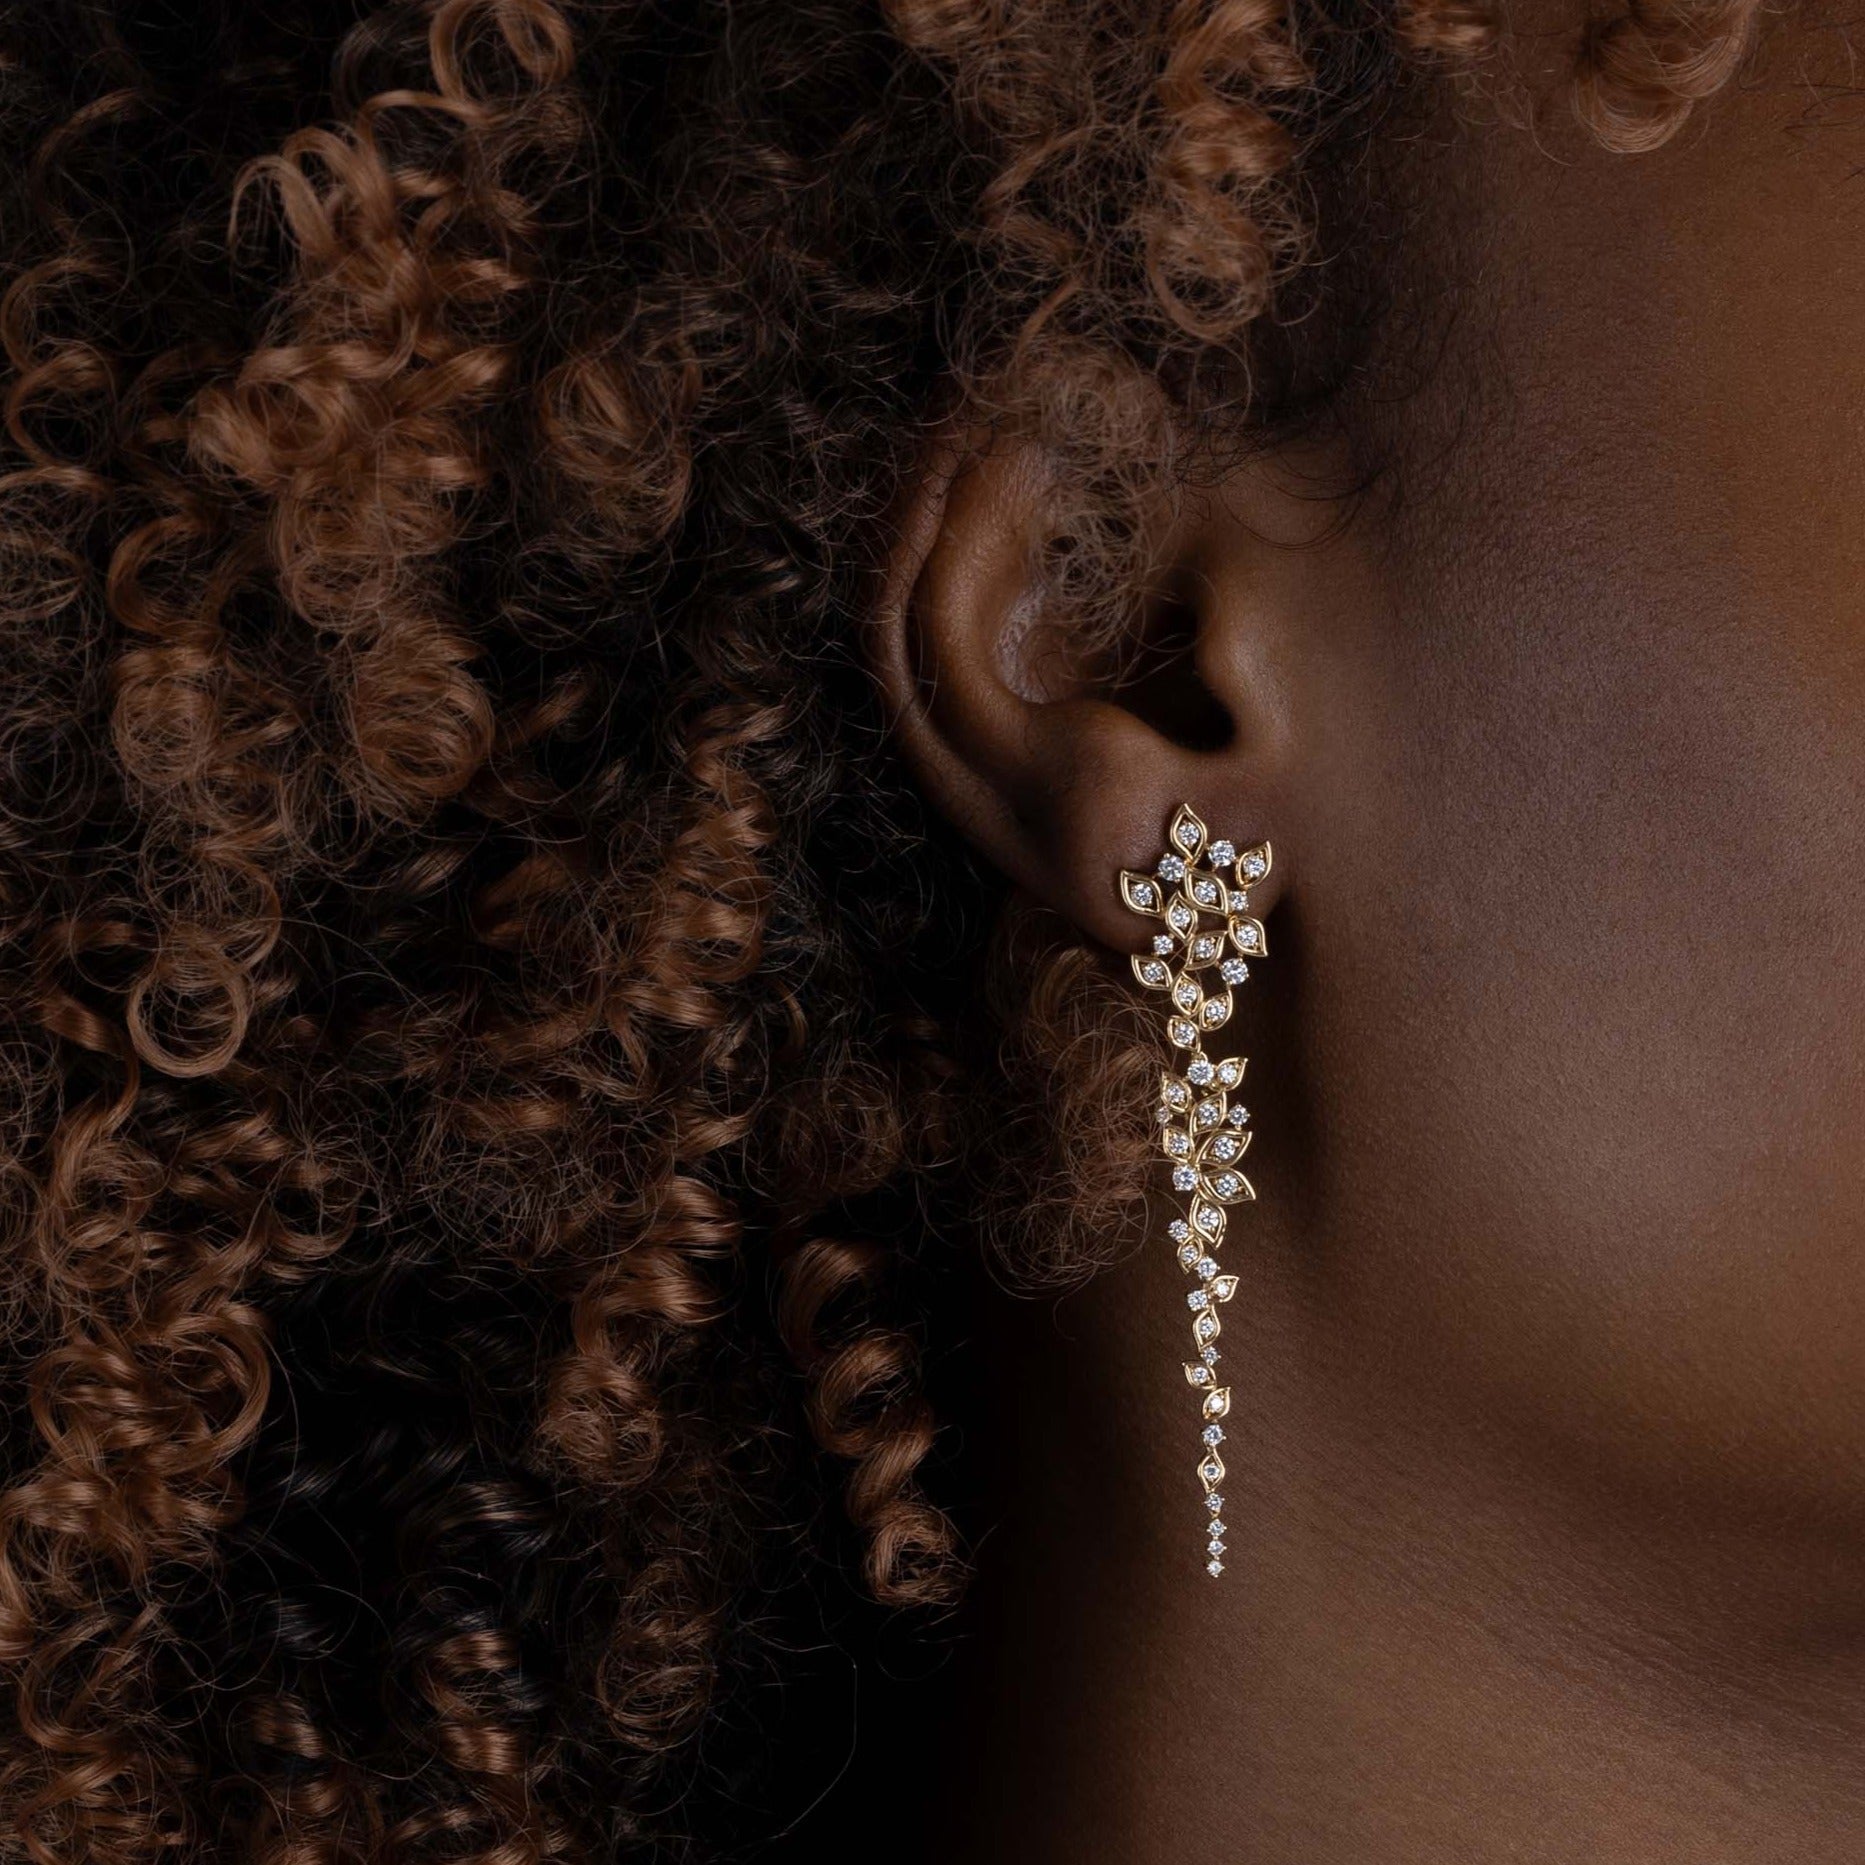 Earrings with Yellow Gold petals and round Diamonds inside them, Large - Model shot